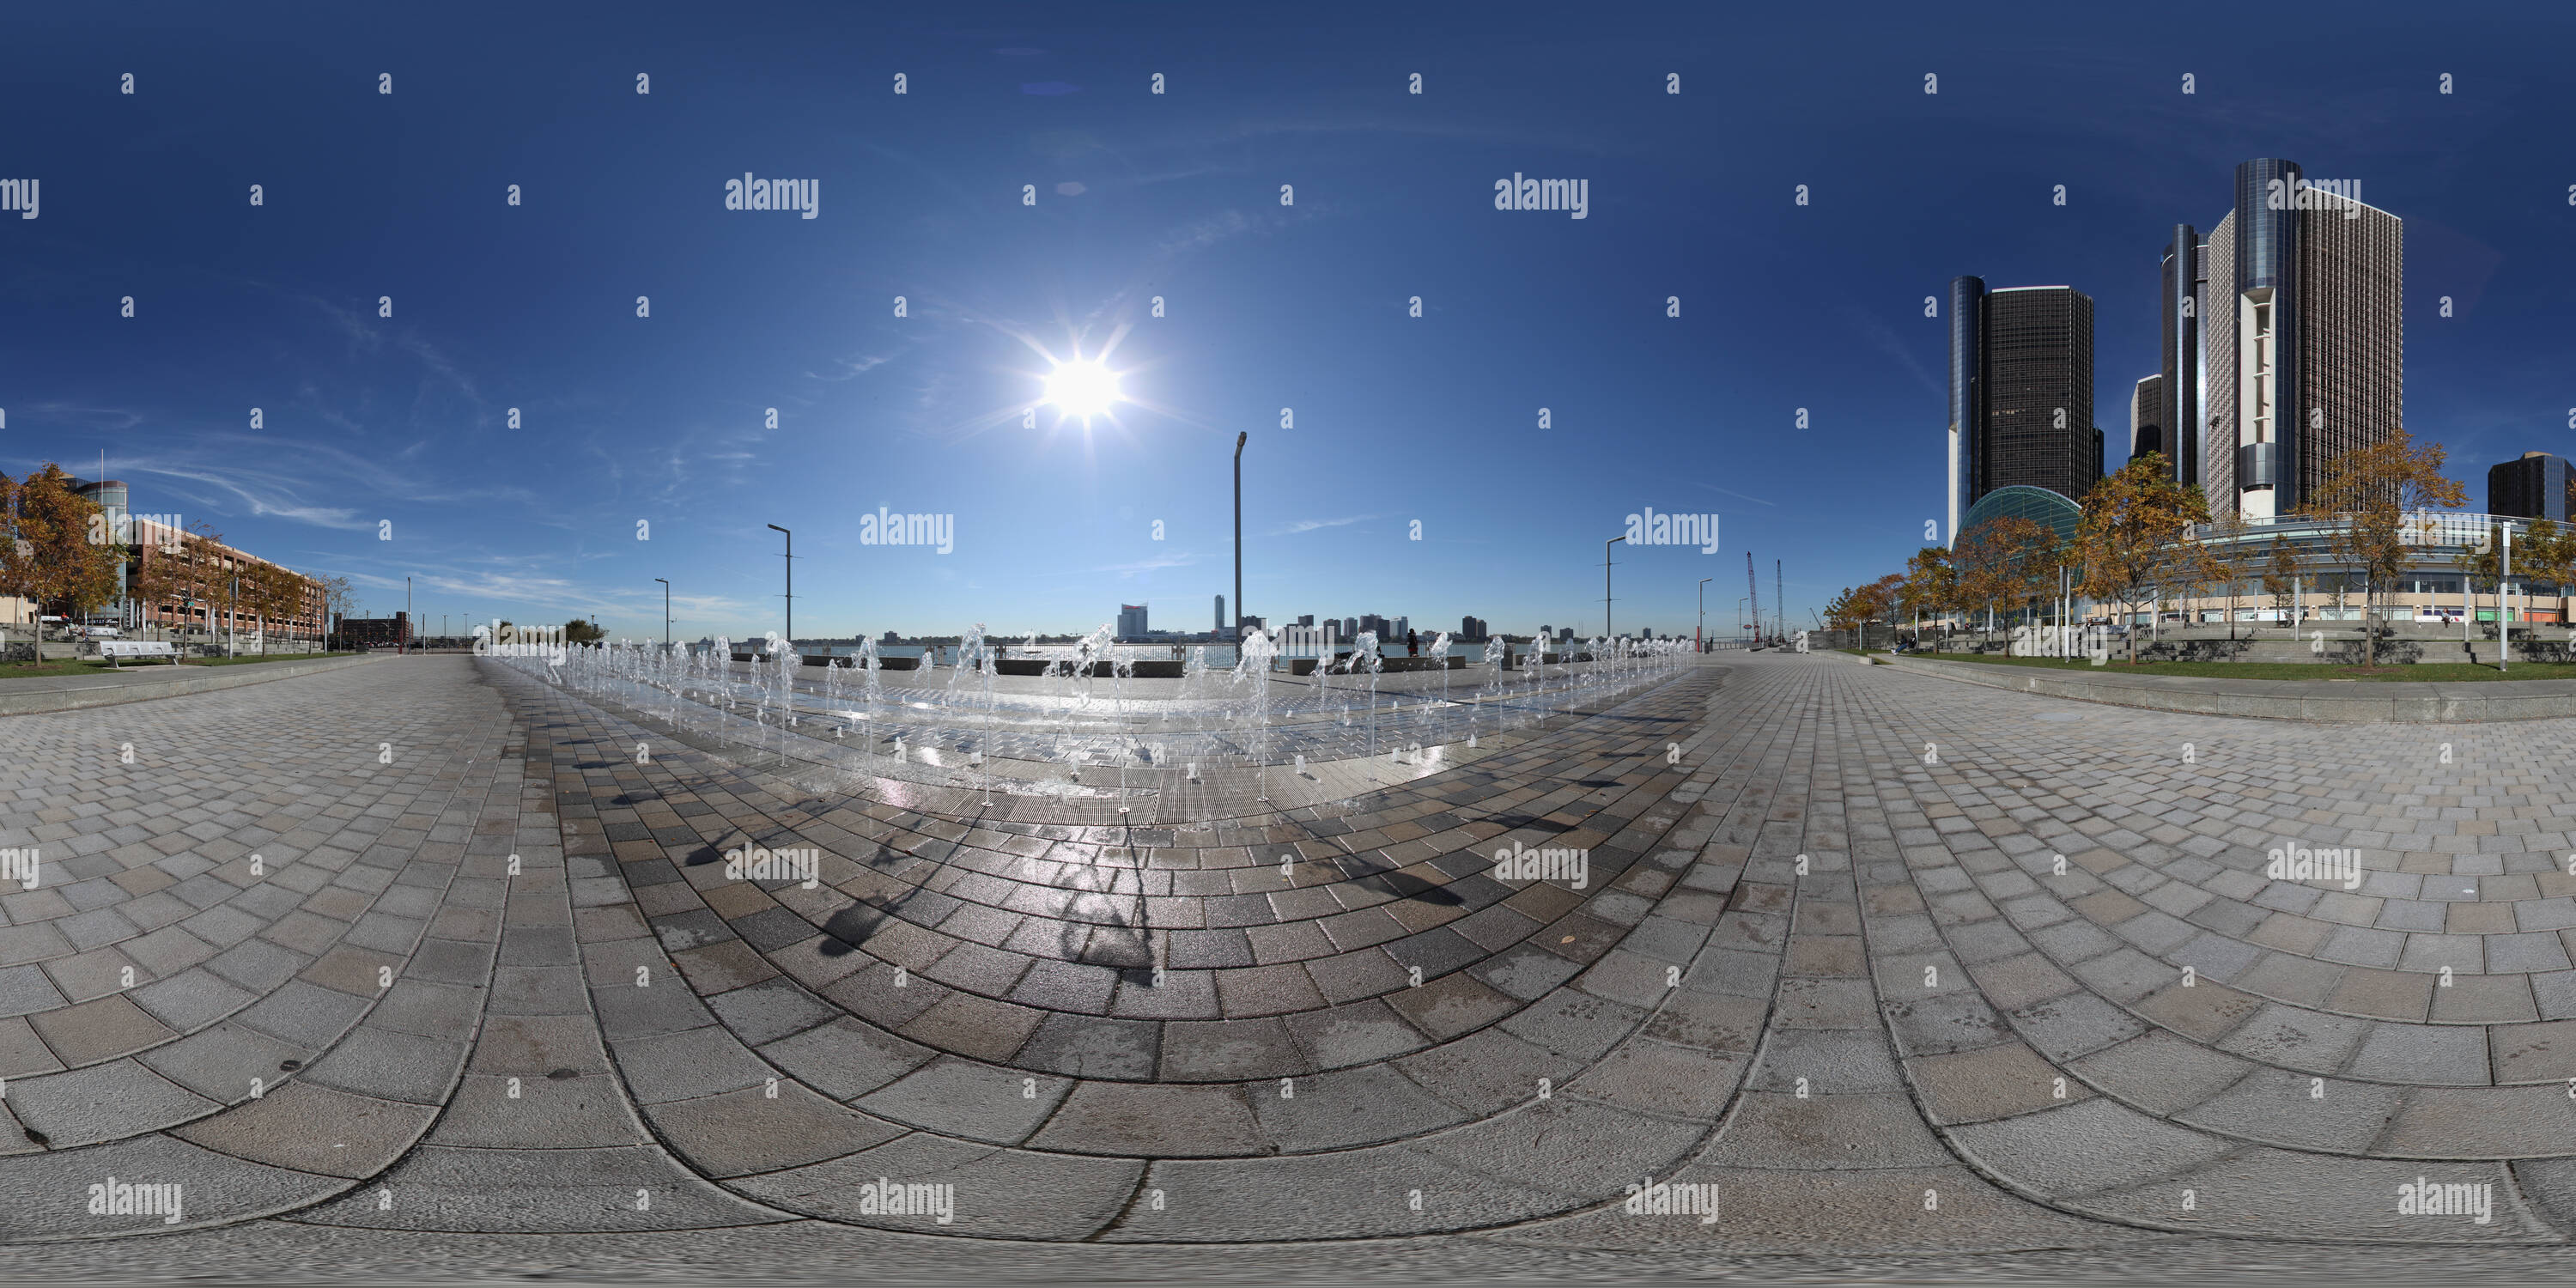 360 degree panoramic view of Fountains at the GM Plaza/Detroit RiverWalk